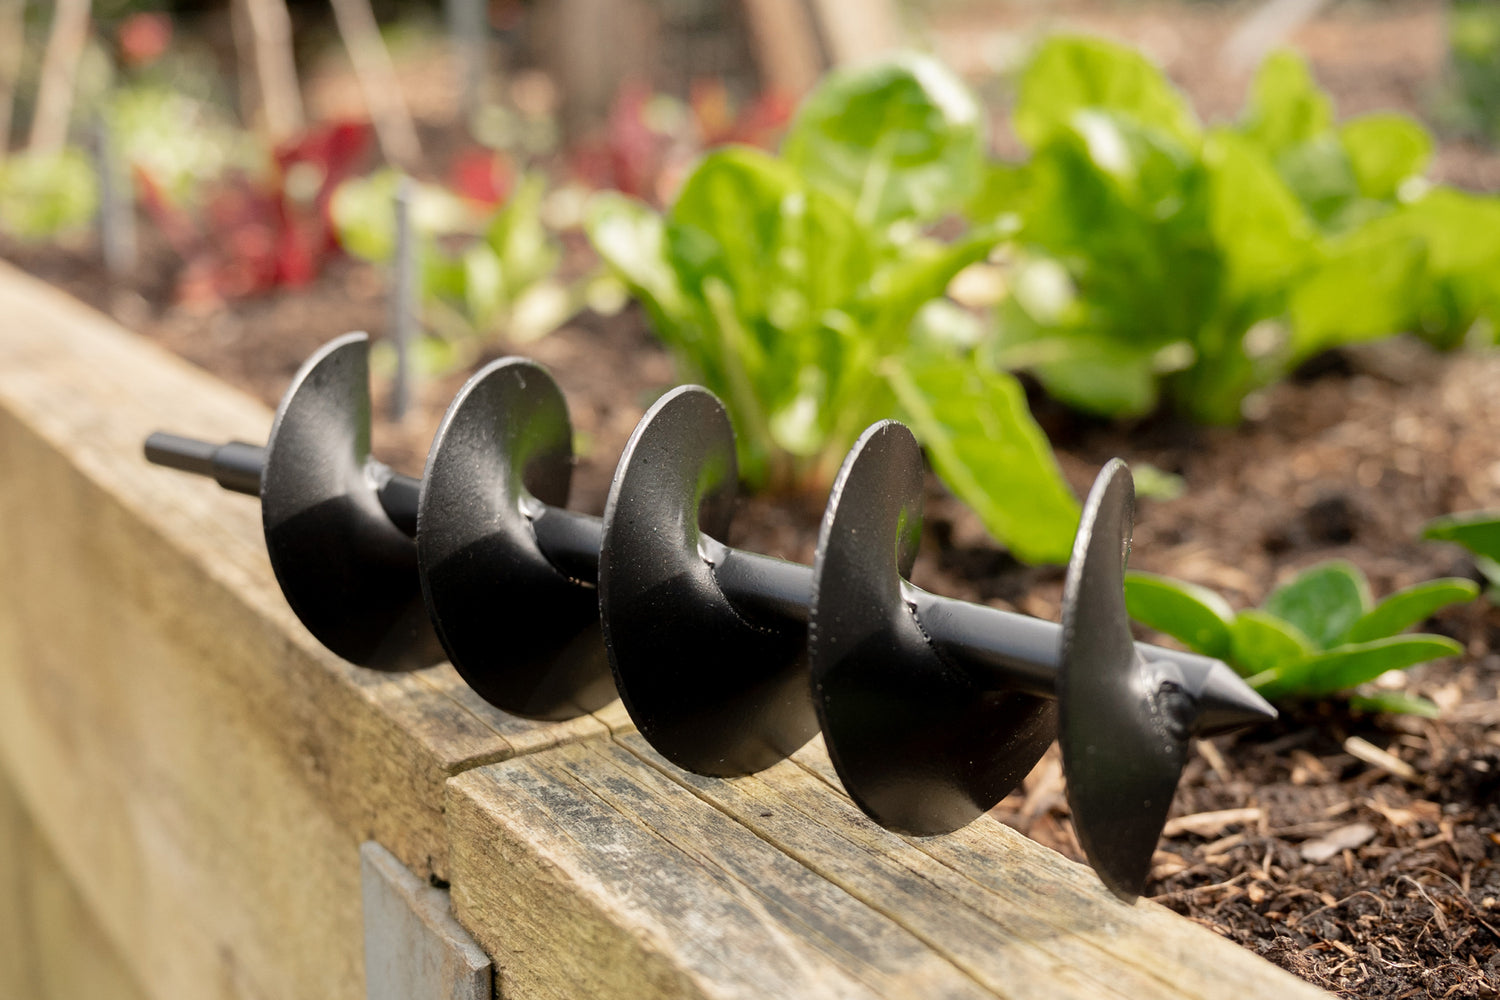 Large Garden Drill Auger resting on the edge of a raised garden bed in the vegetable patch